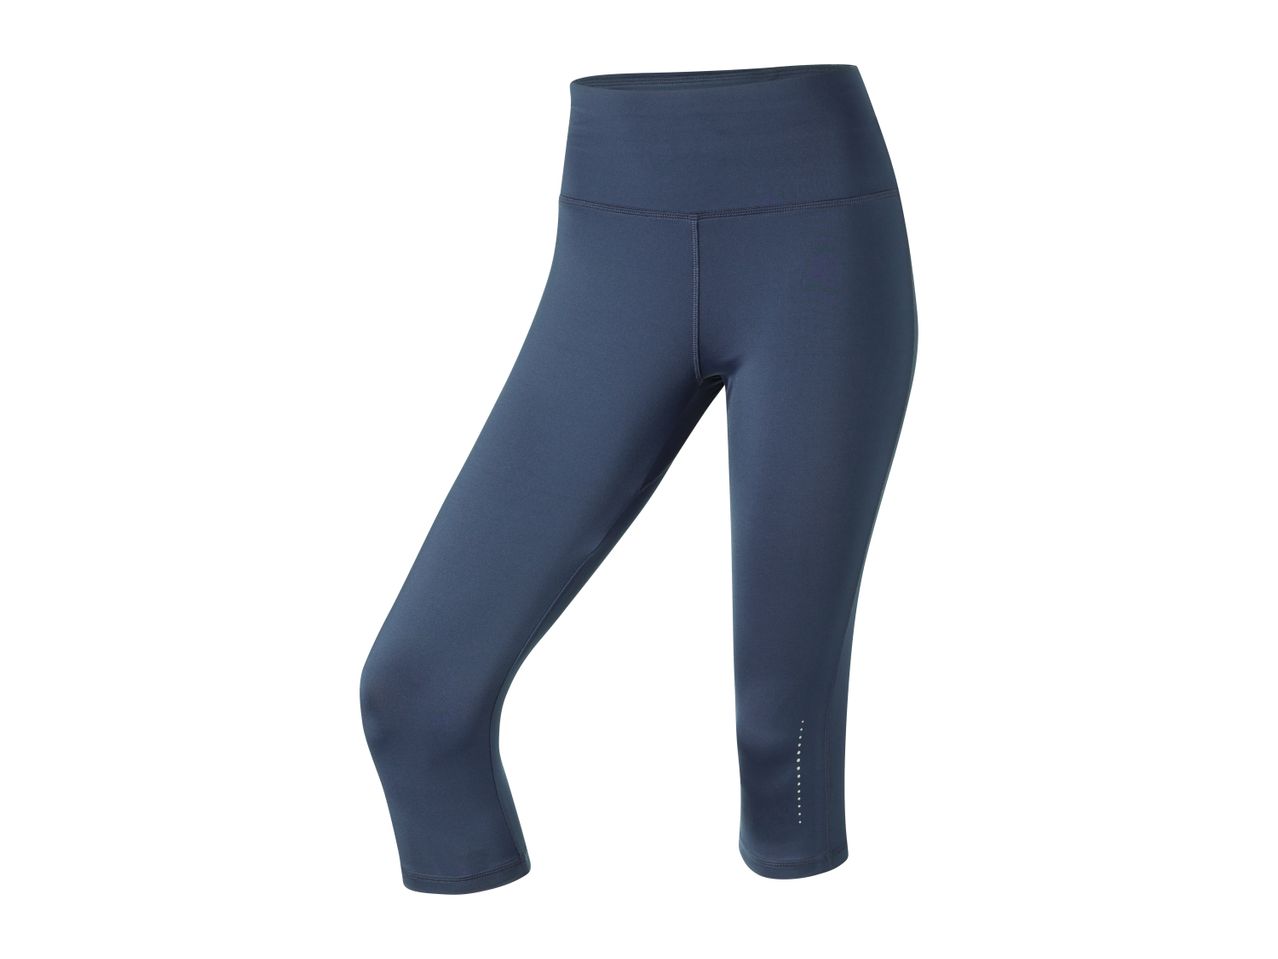 Go to full screen view: Crivit Ladies’ Cropped Sports Leggings - Image 11